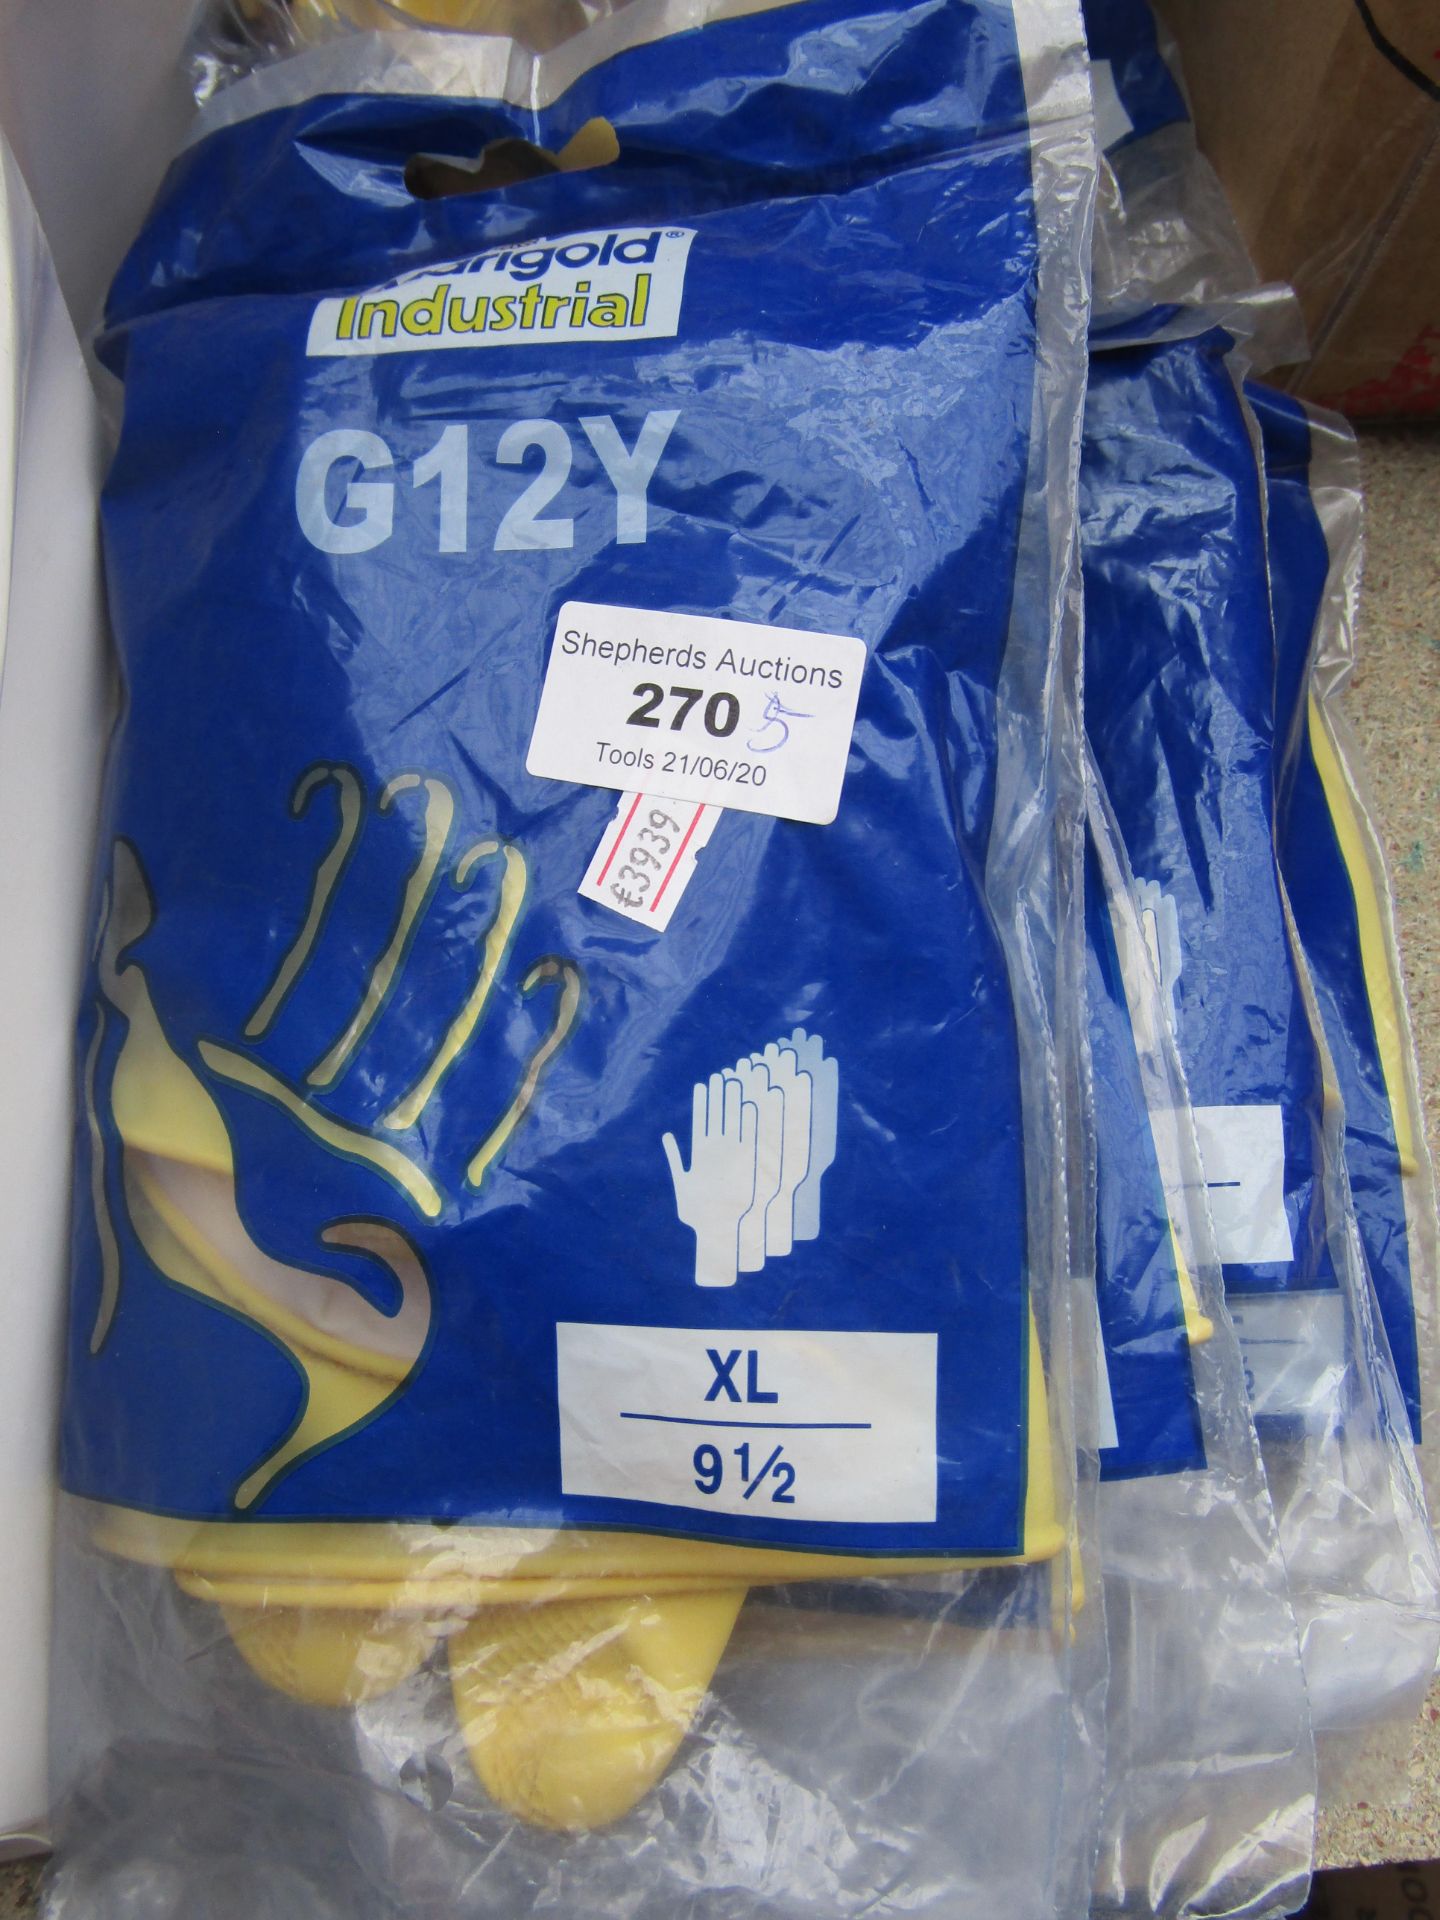 5x G12Y Viynl gloves, size 9 1/2, new and packaged.